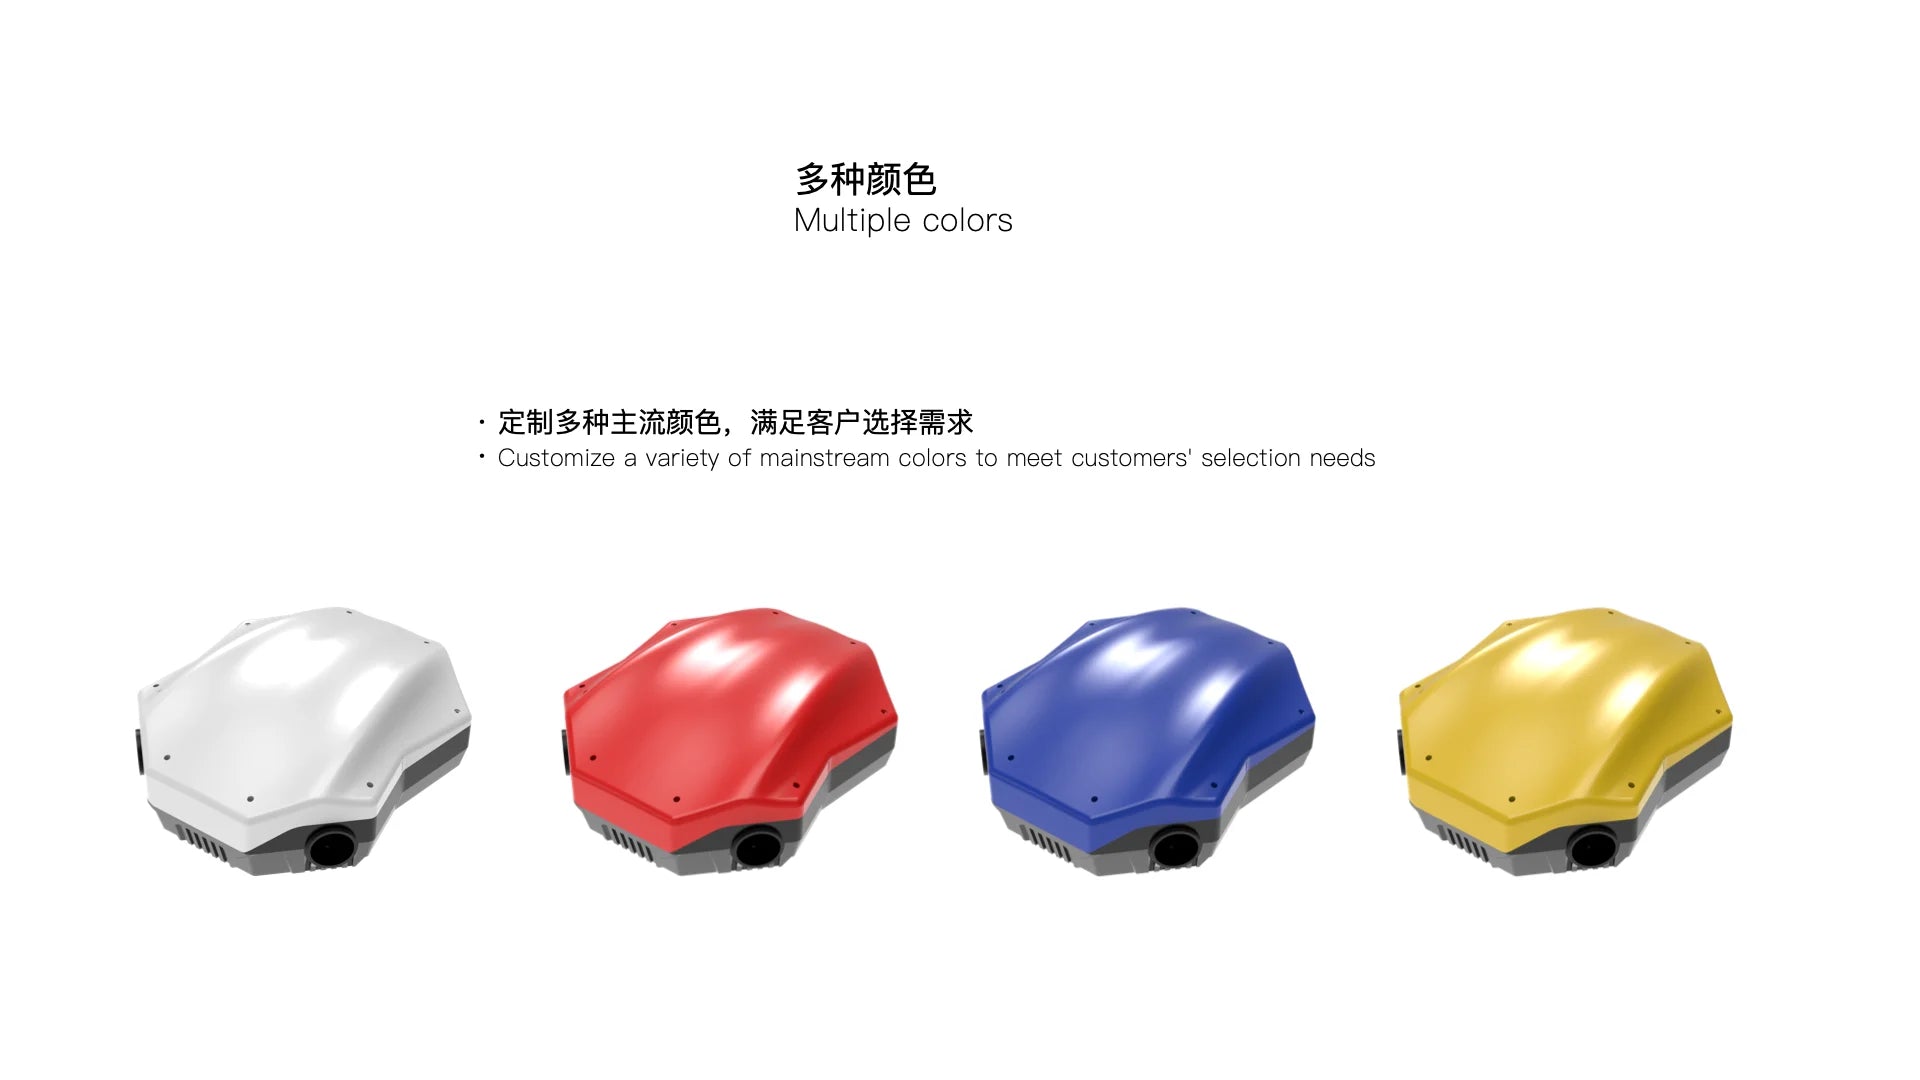 JIS EV422 22L Agriculture drone, Customize a variety of mainstream colors to meet customers' selection needs . mr